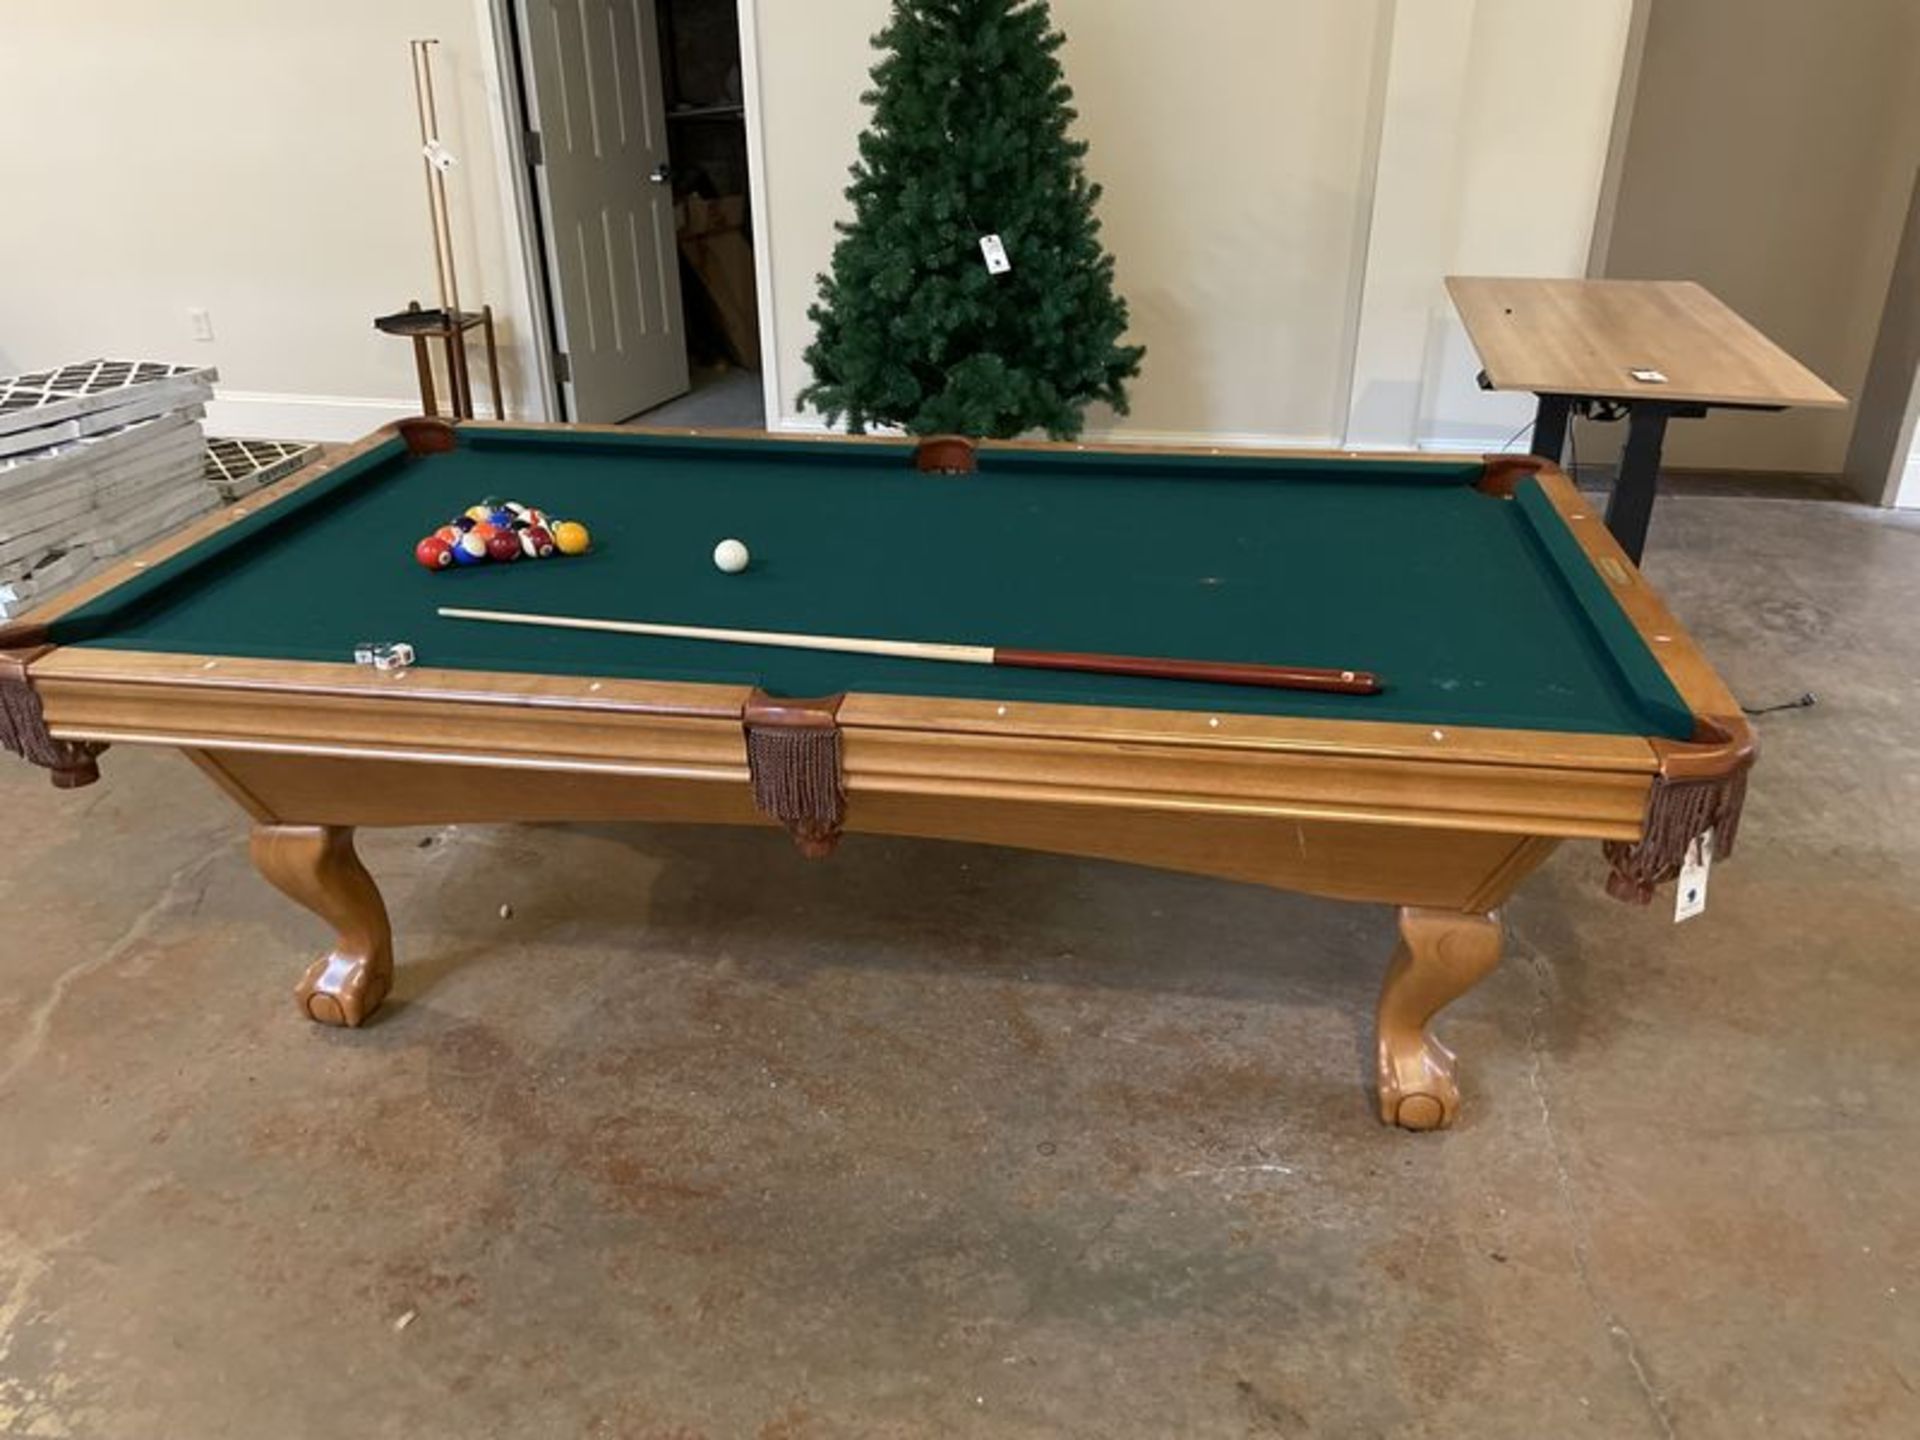 Contender by Brunswick Pool Table approx. 8' w/ Balls, Sticks, and Rack - Image 2 of 5